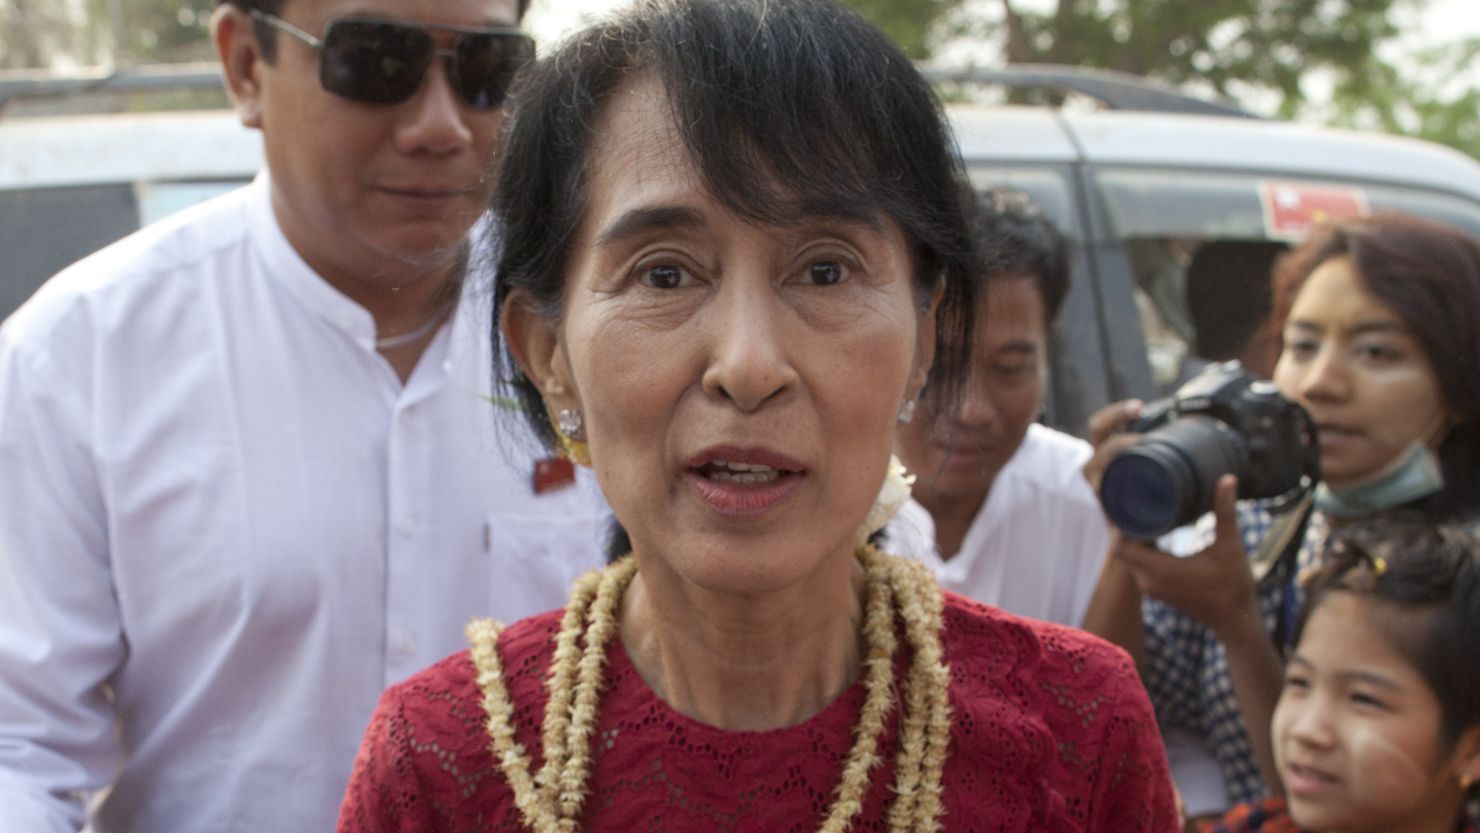 Myanmar's National League for Democracy leader Aung San Suu Kyi pictured at a polling station in 2012.